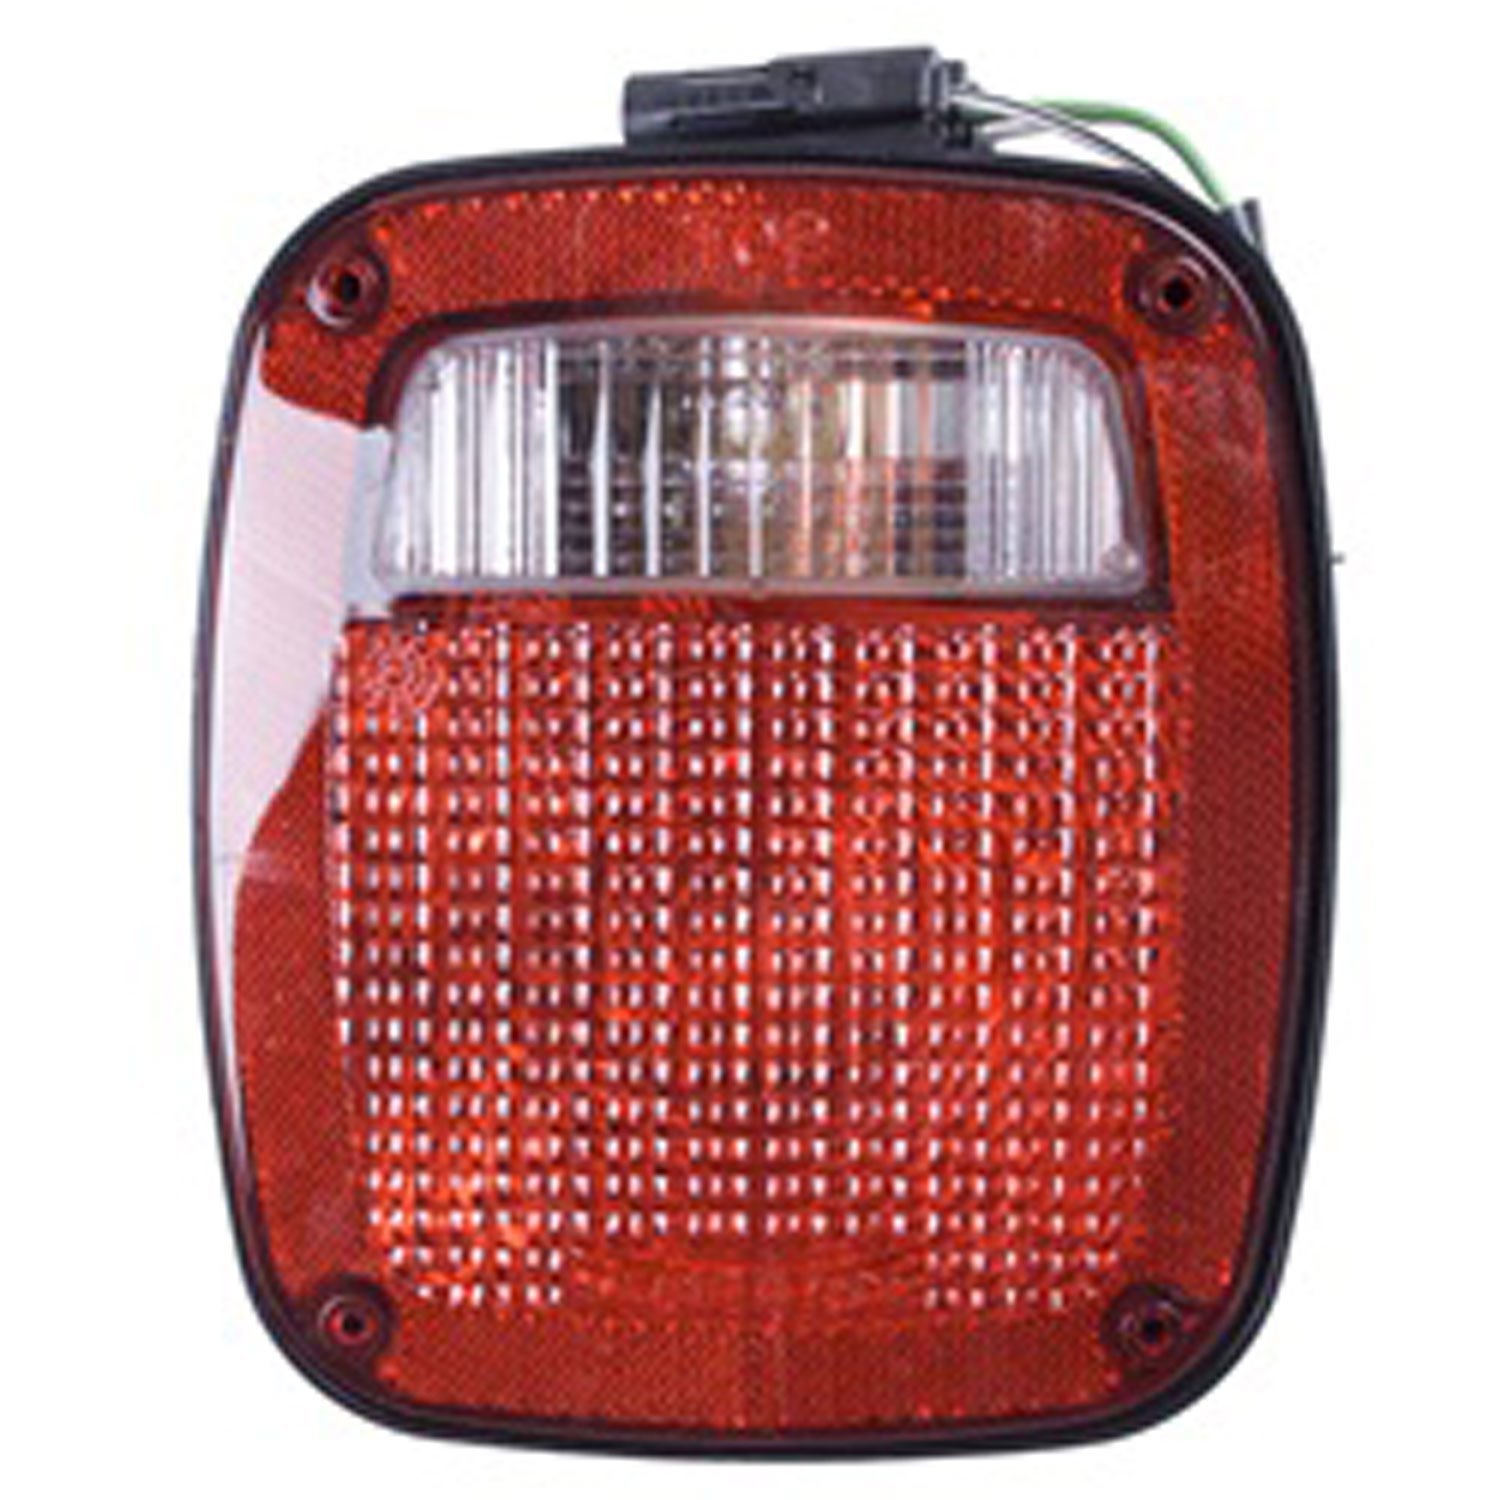 Replacement tail light assembly from Omix-ADA, Fits left side of 91-97 Jeep Wrangler